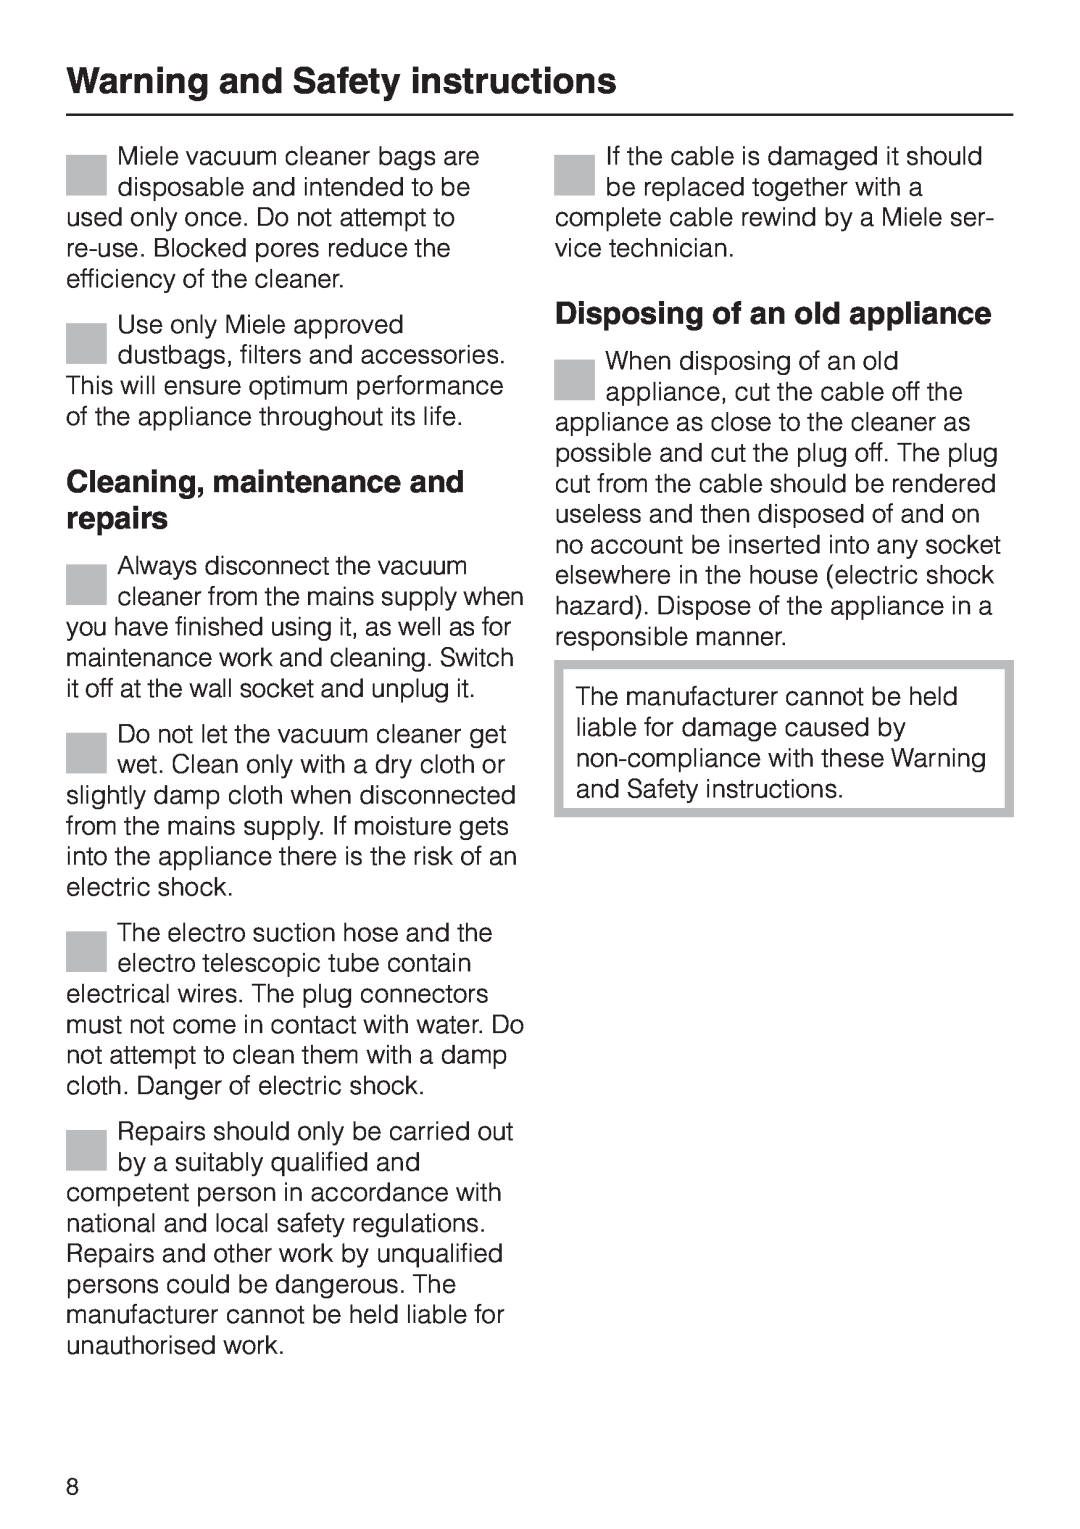 Miele S 5980 manual Cleaning, maintenance and repairs, Disposing of an old appliance, Warning and Safety instructions 